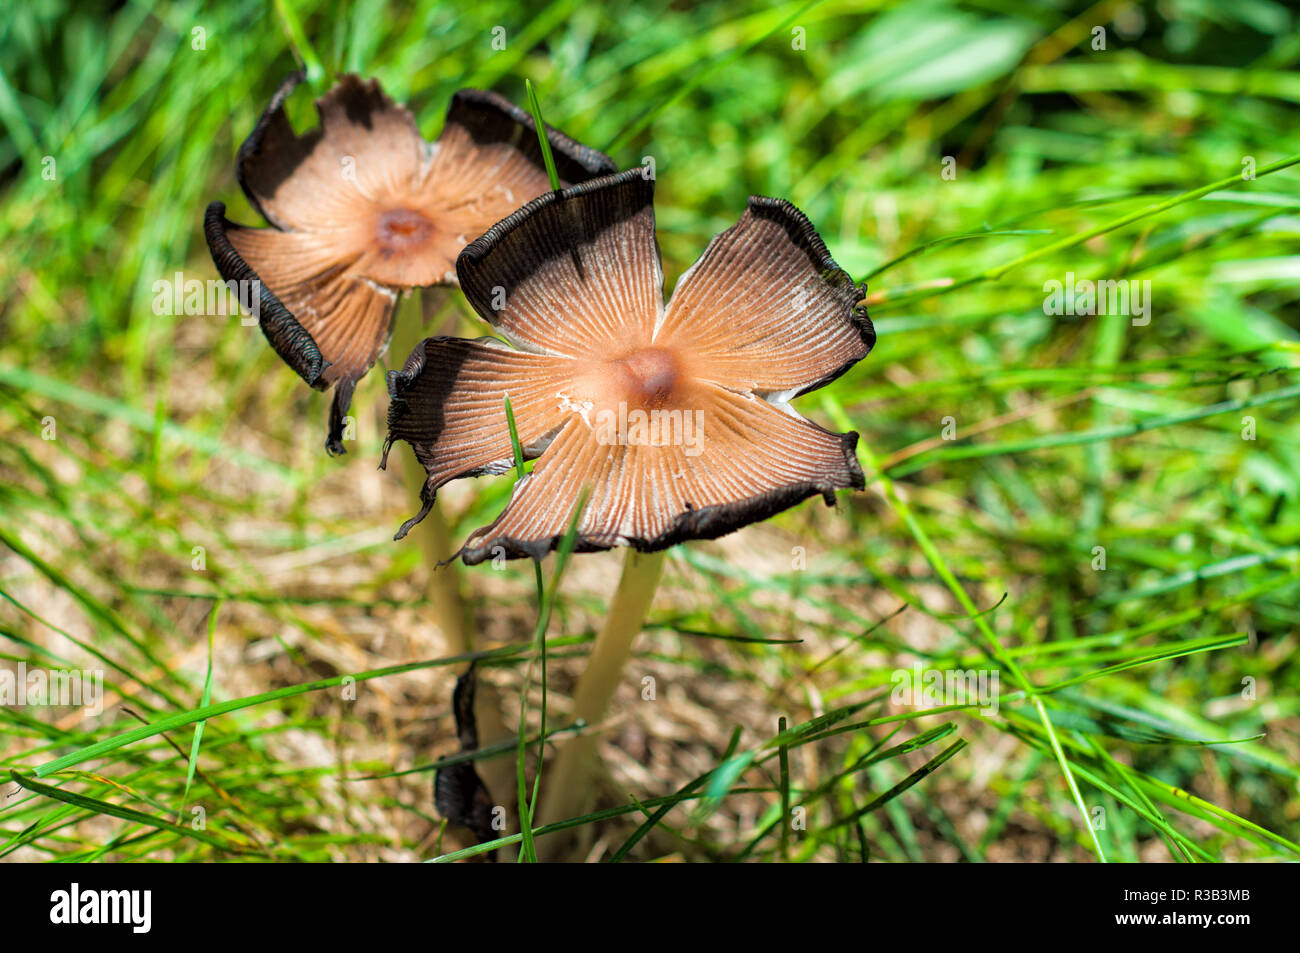 Two mushrooms in the grass, natural habitat Stock Photo